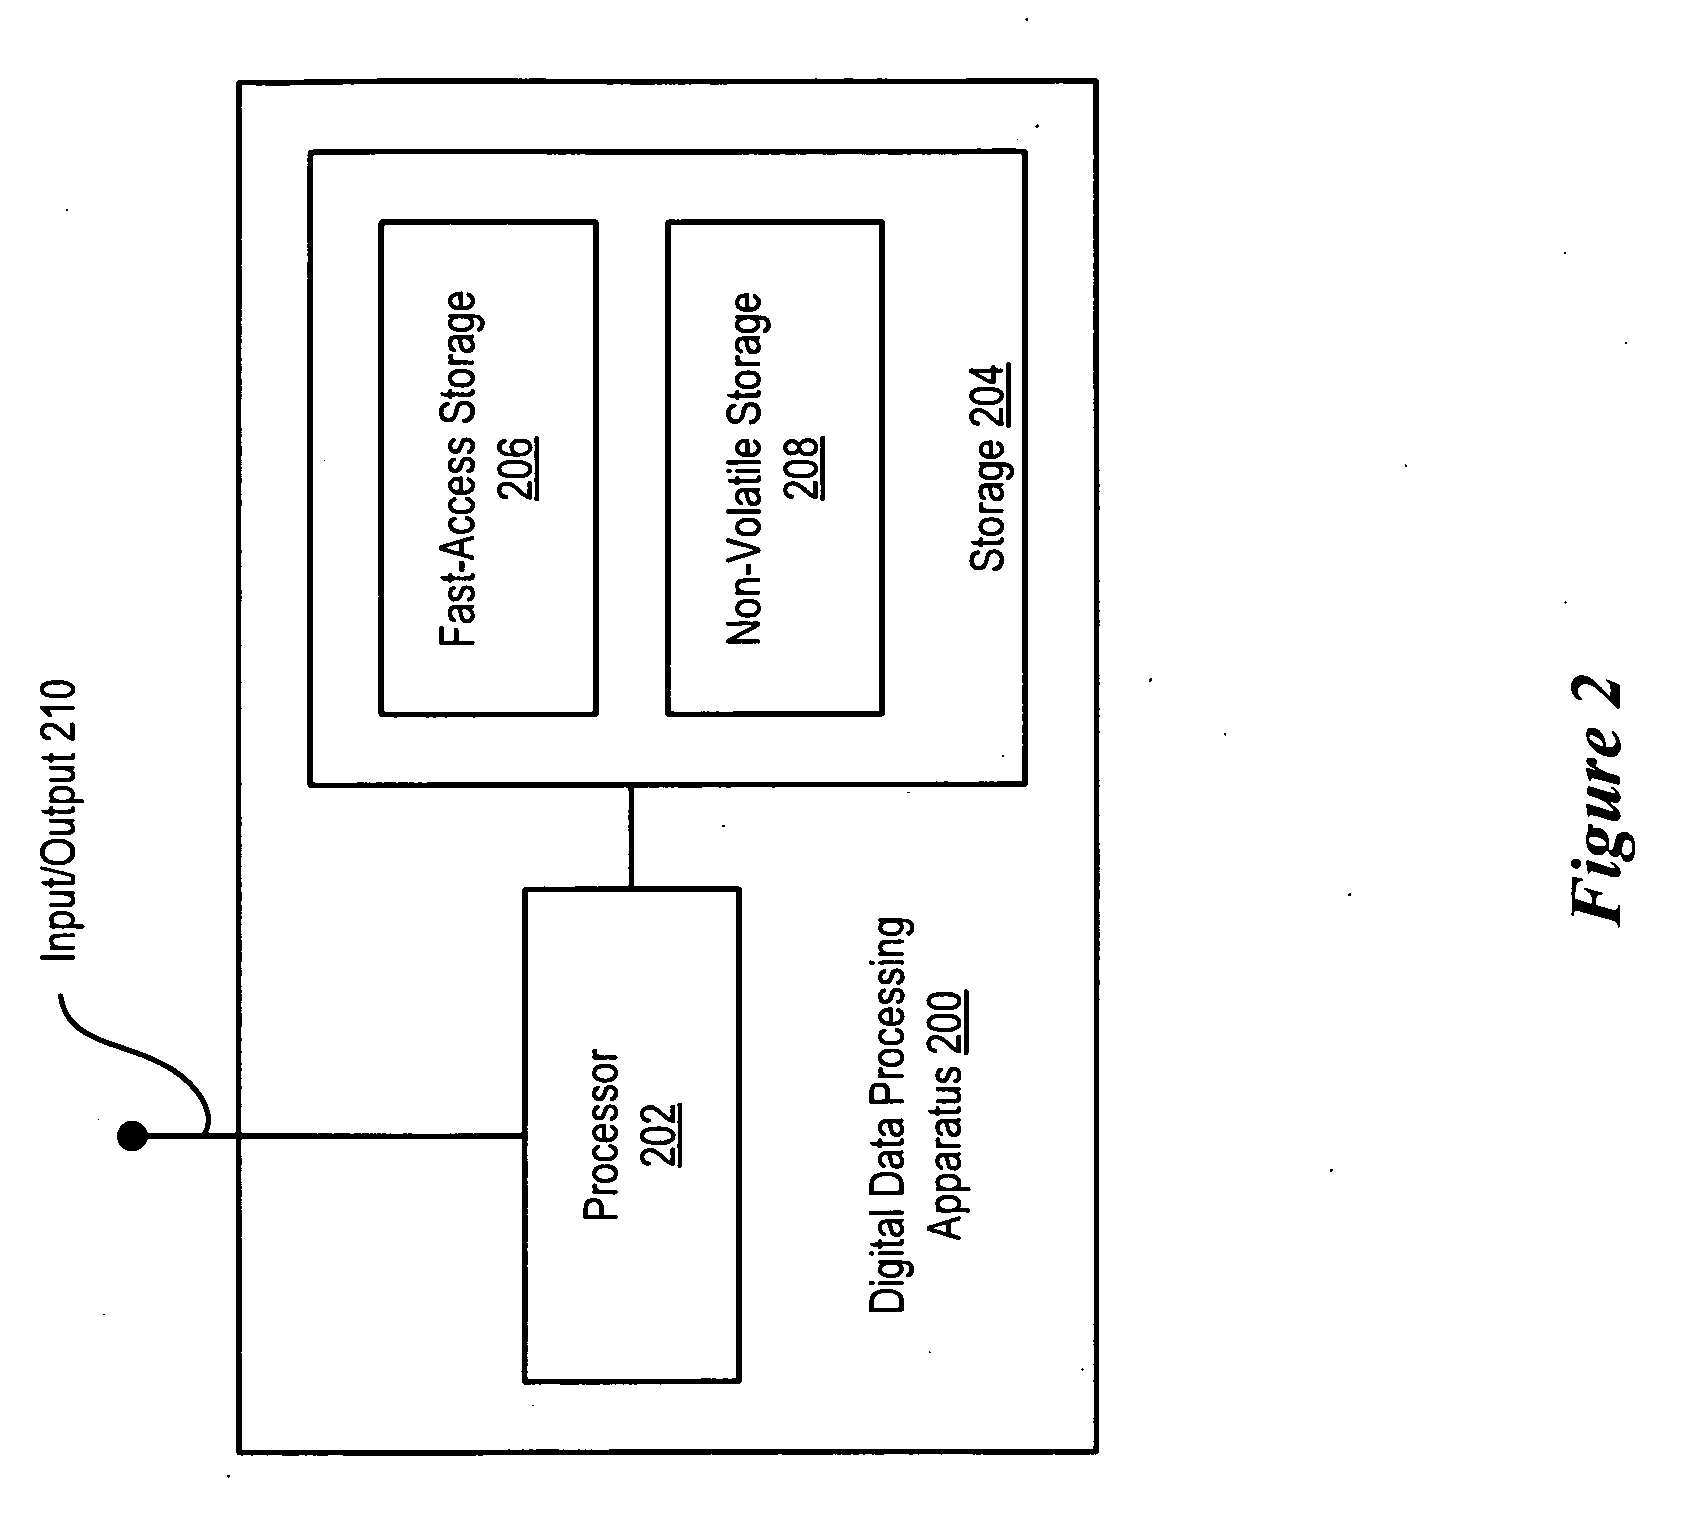 Method of Backing Up Library Virtual Private Database Using a Web Browser